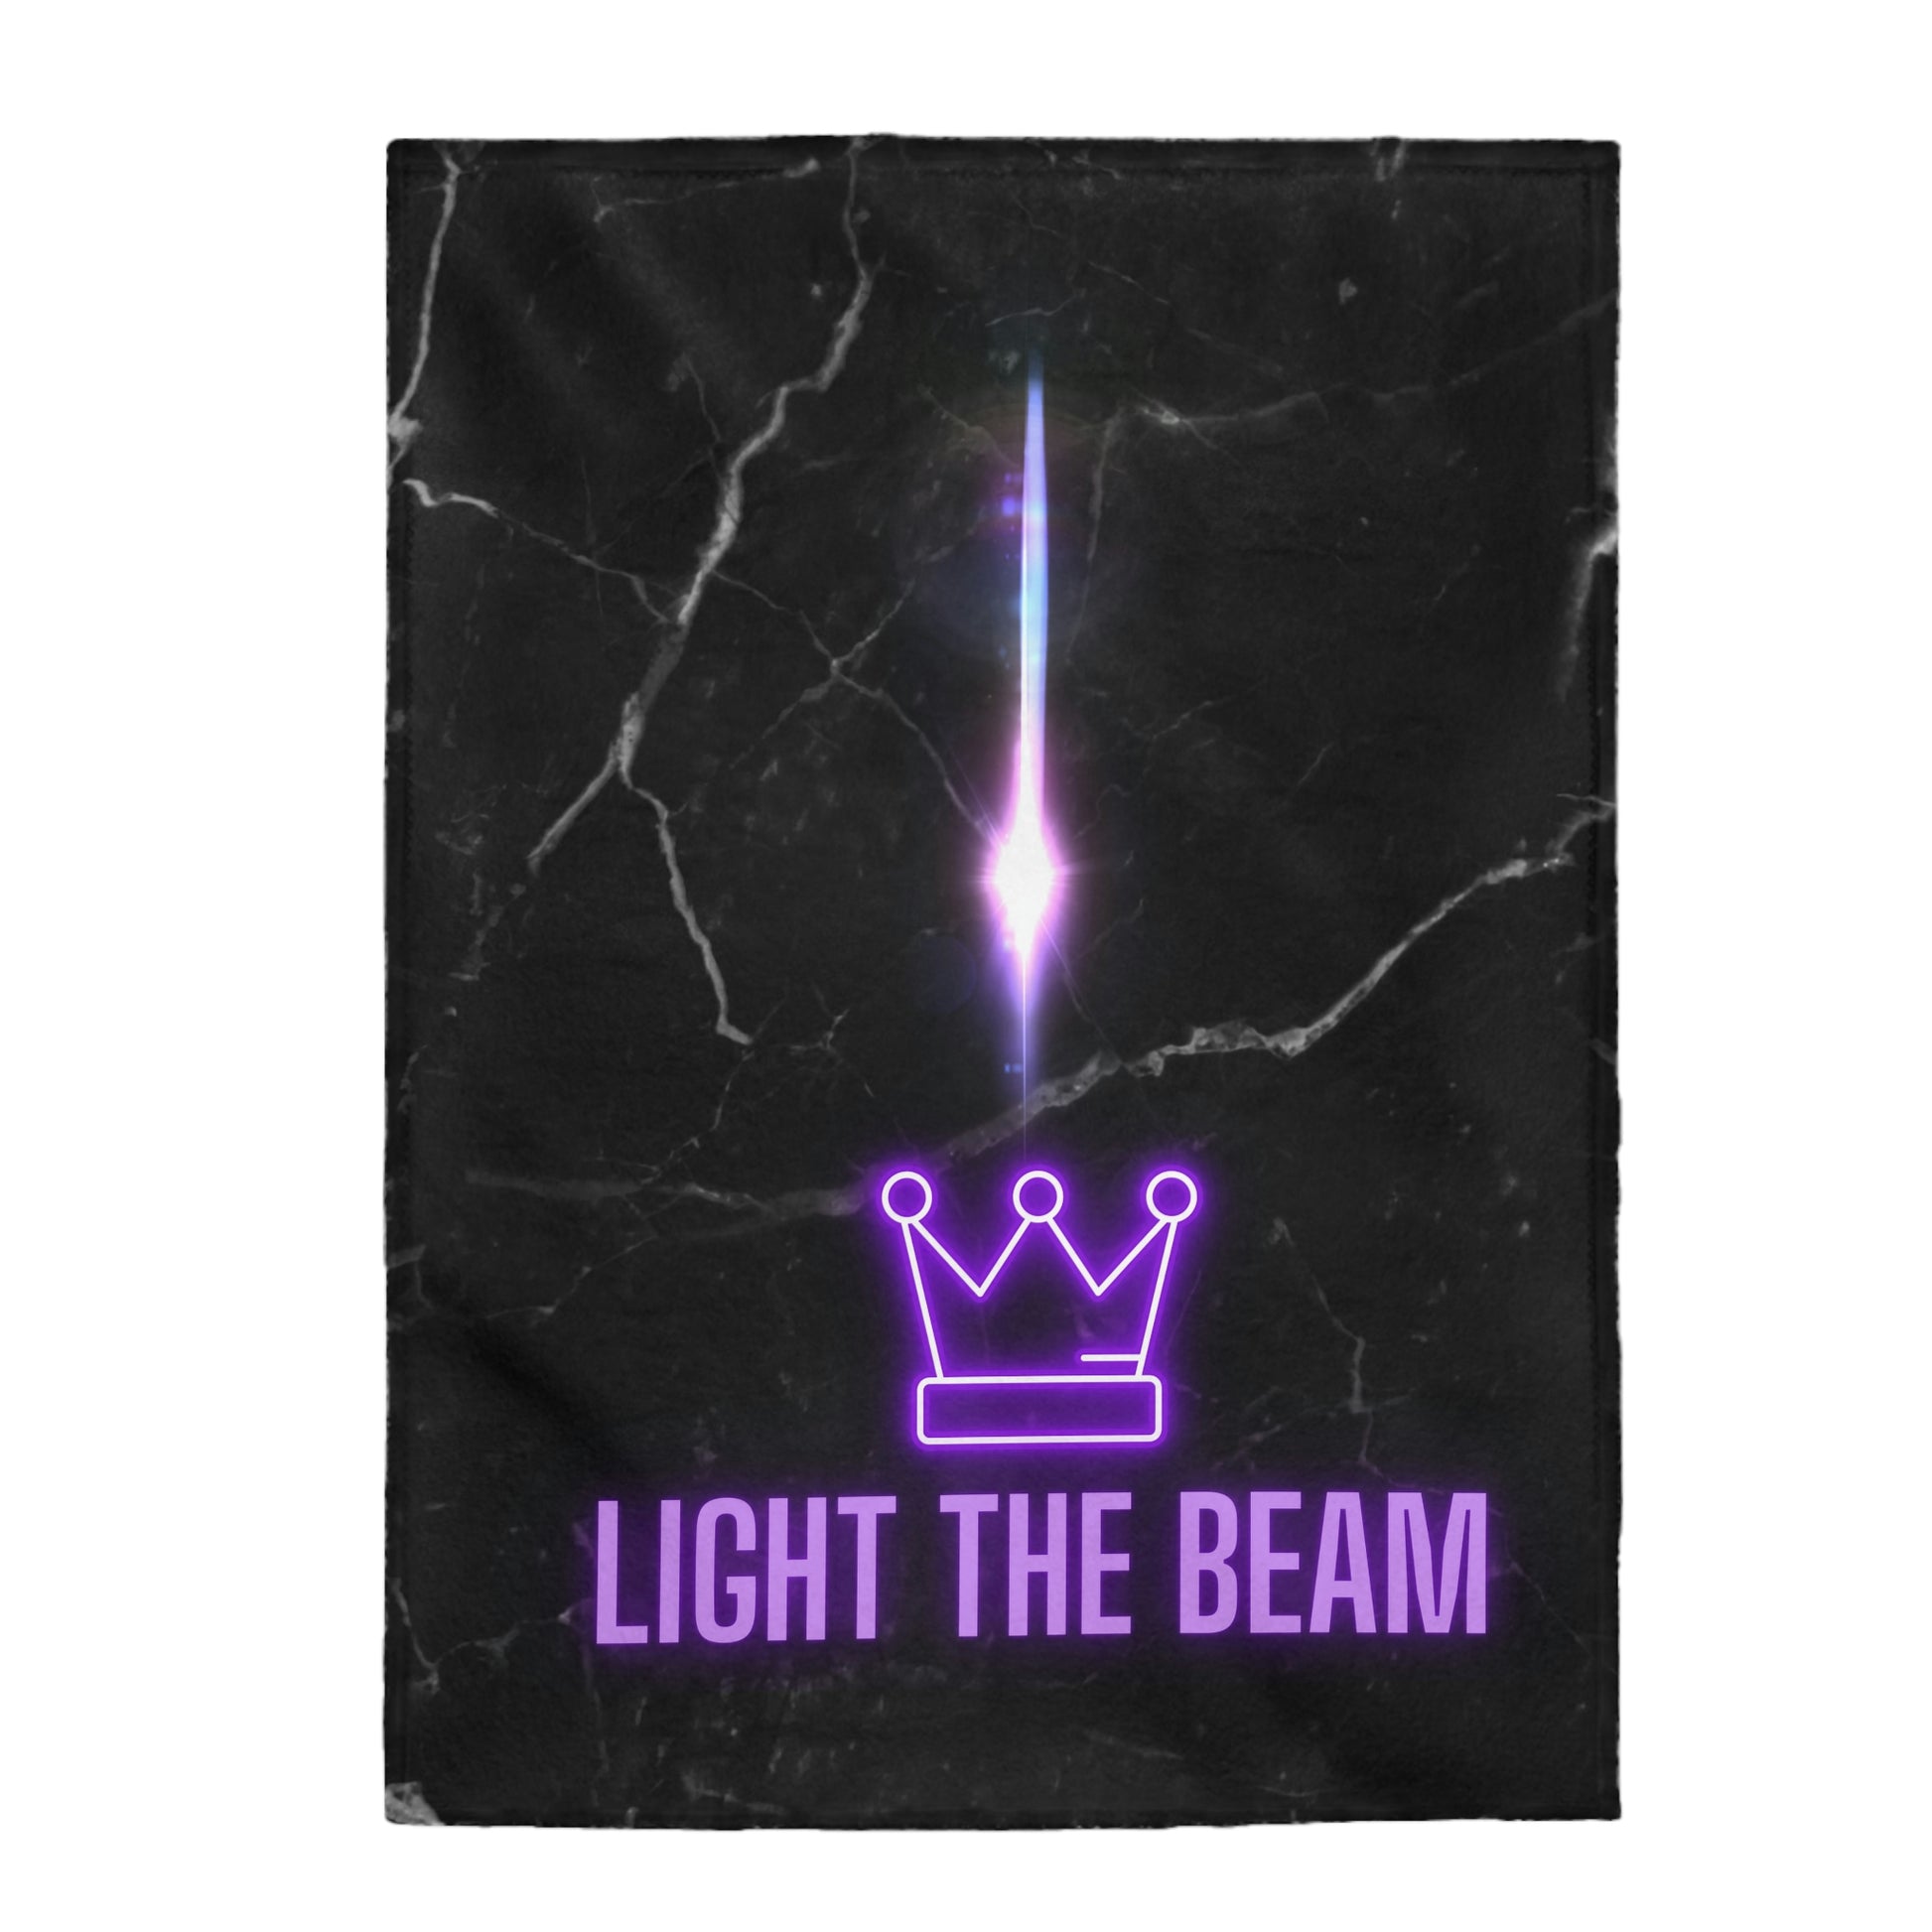 Light the Beam Blanket, Sacramento Basketball Blanket, Sac Town Team Fans, Beam Town, Sac BeamTown, Sac Beam Team, Gift for Sacramento Fans.Light the Beam - Beam Town! Celebrate another Sacramento W - WIN - for your Kings Basketball team in this cozy, lightweight, silky-soft, velveteen fleece blanket. Perfect to keep you warm watching the game. It's going to be an epic season for our Sacramento Basketball team - show off your Sac BeamTown pride. Smallest size is the perfect baby Sac fan stroller blanket.